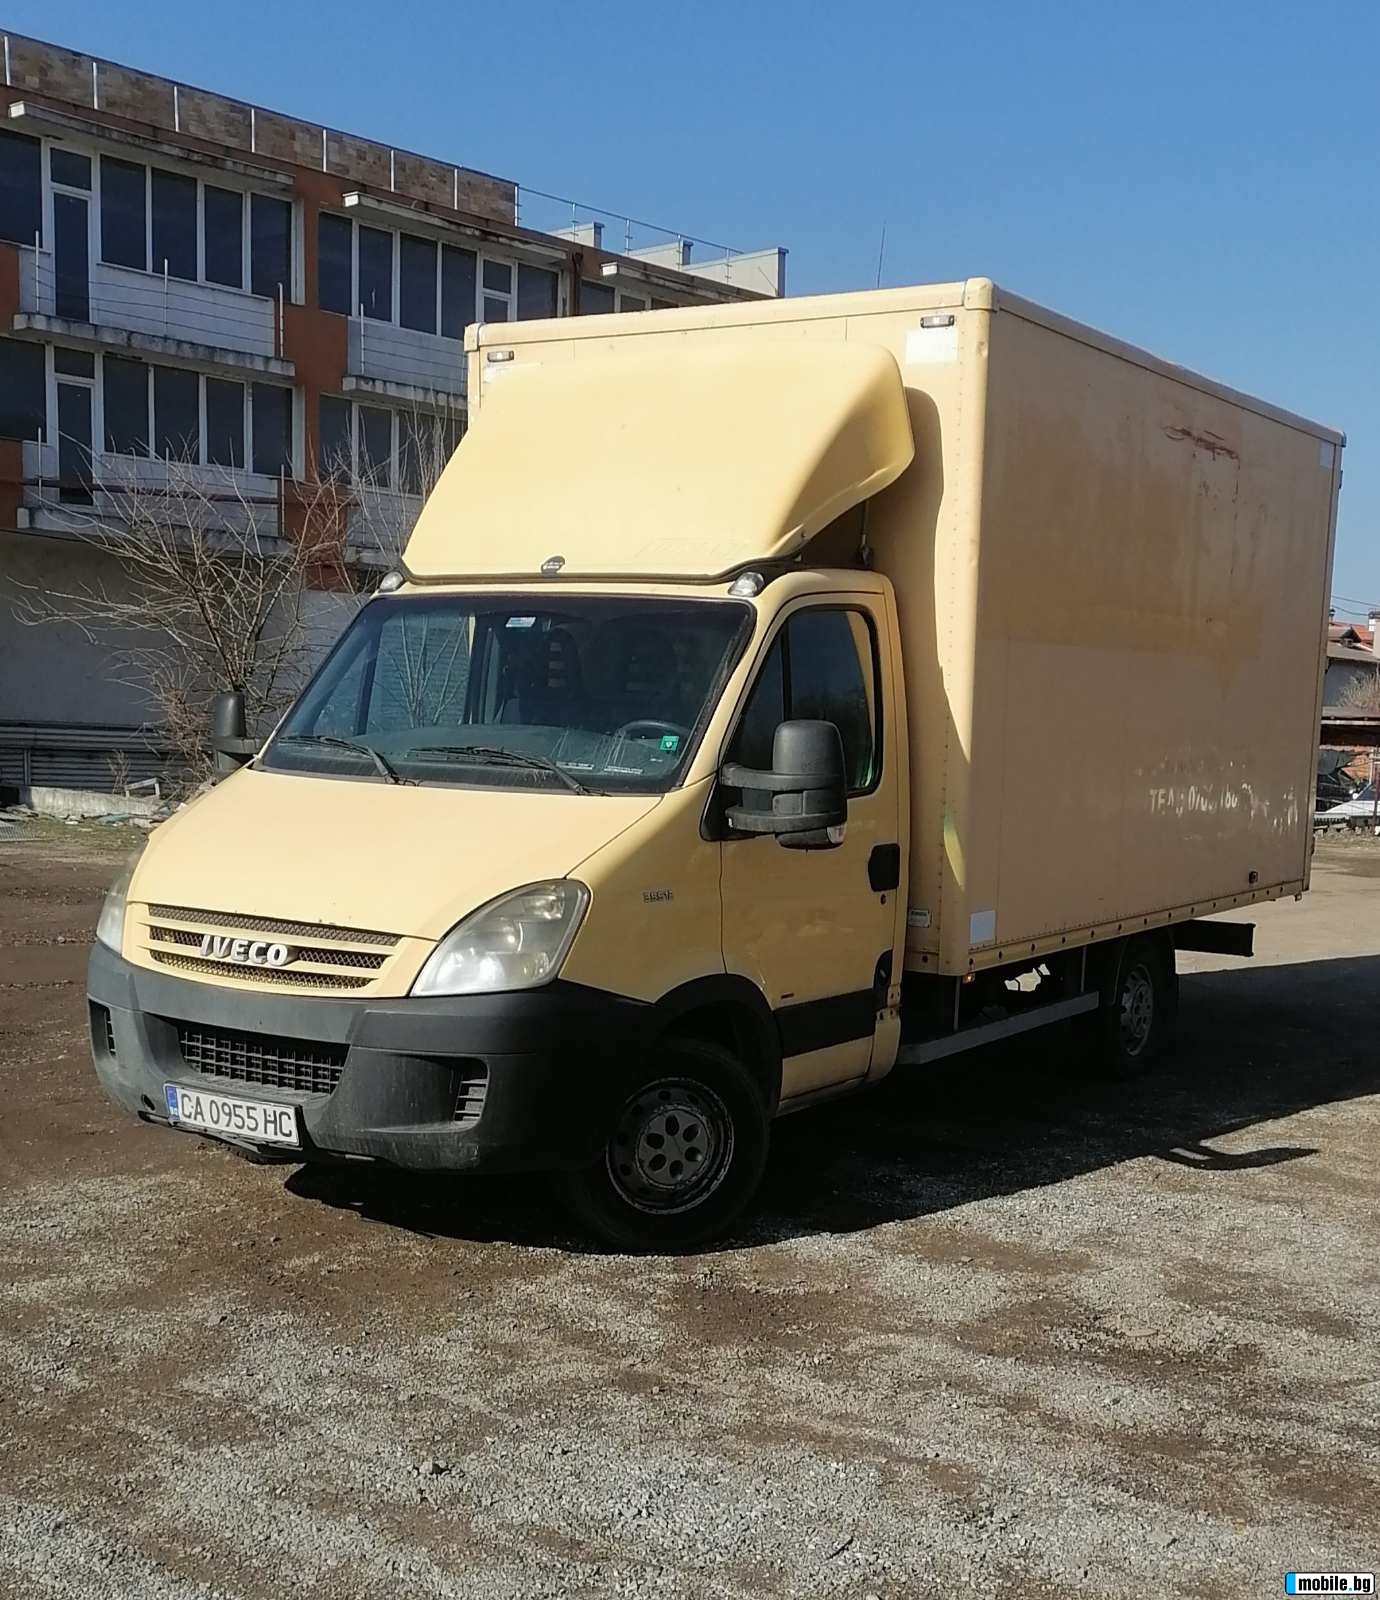 Iveco Daily 35s12  | Mobile.bg   2